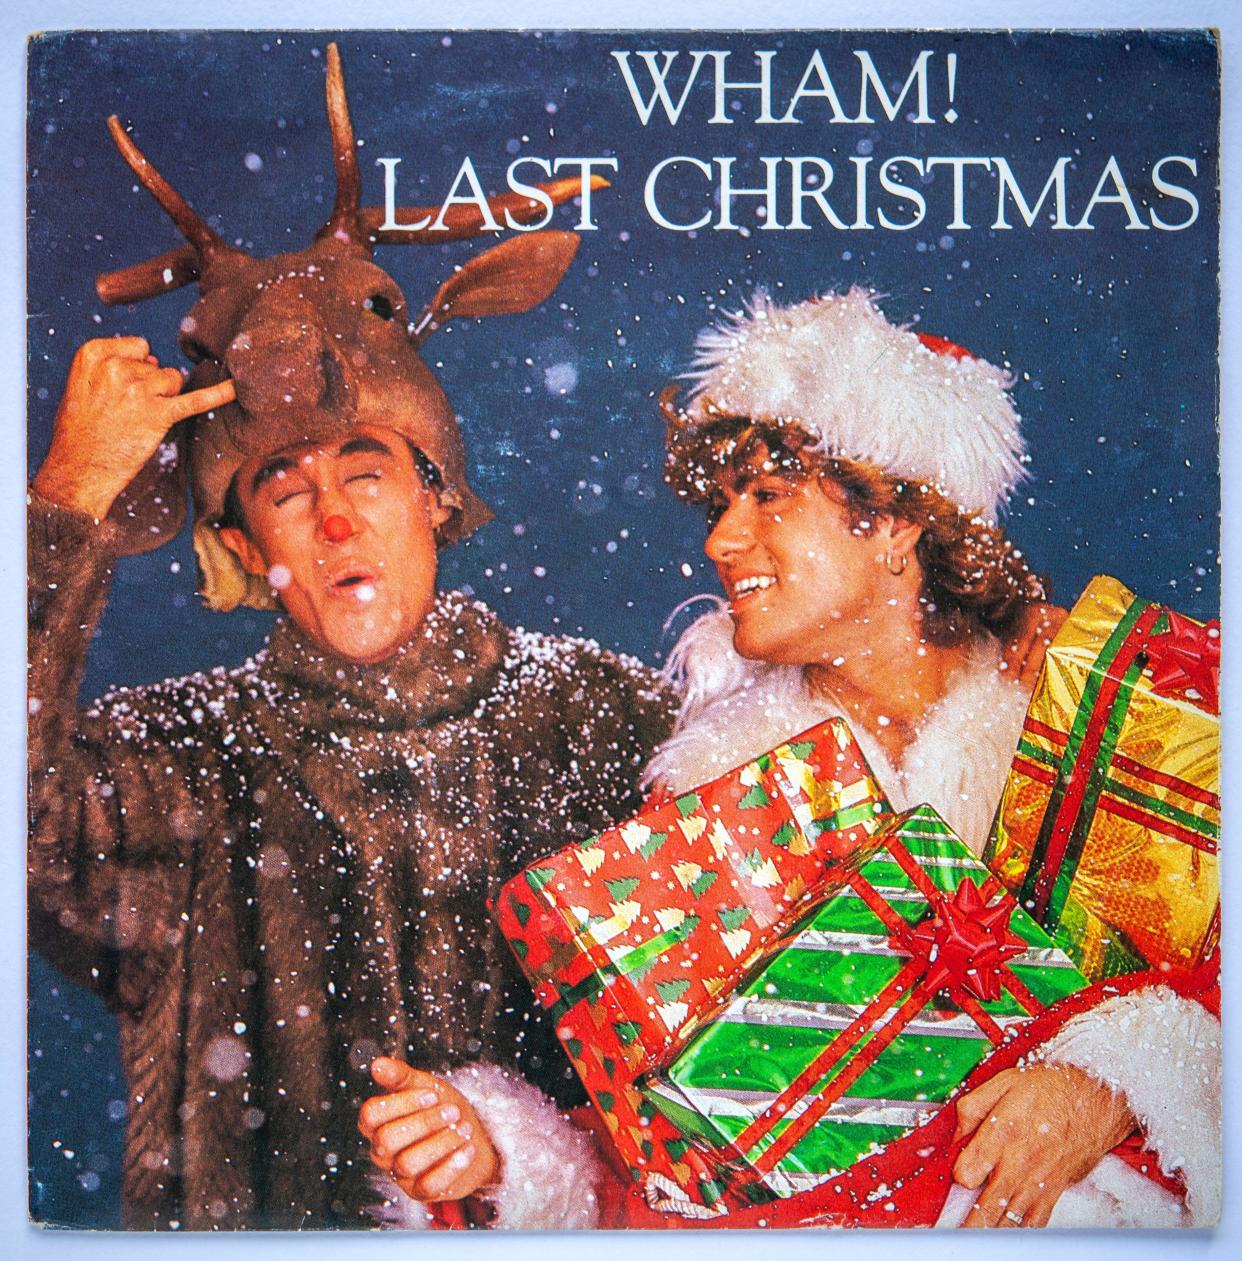 Picture cover of the seven inch vinyl version of Last Christmas by Wham!, which was originally released in 1984